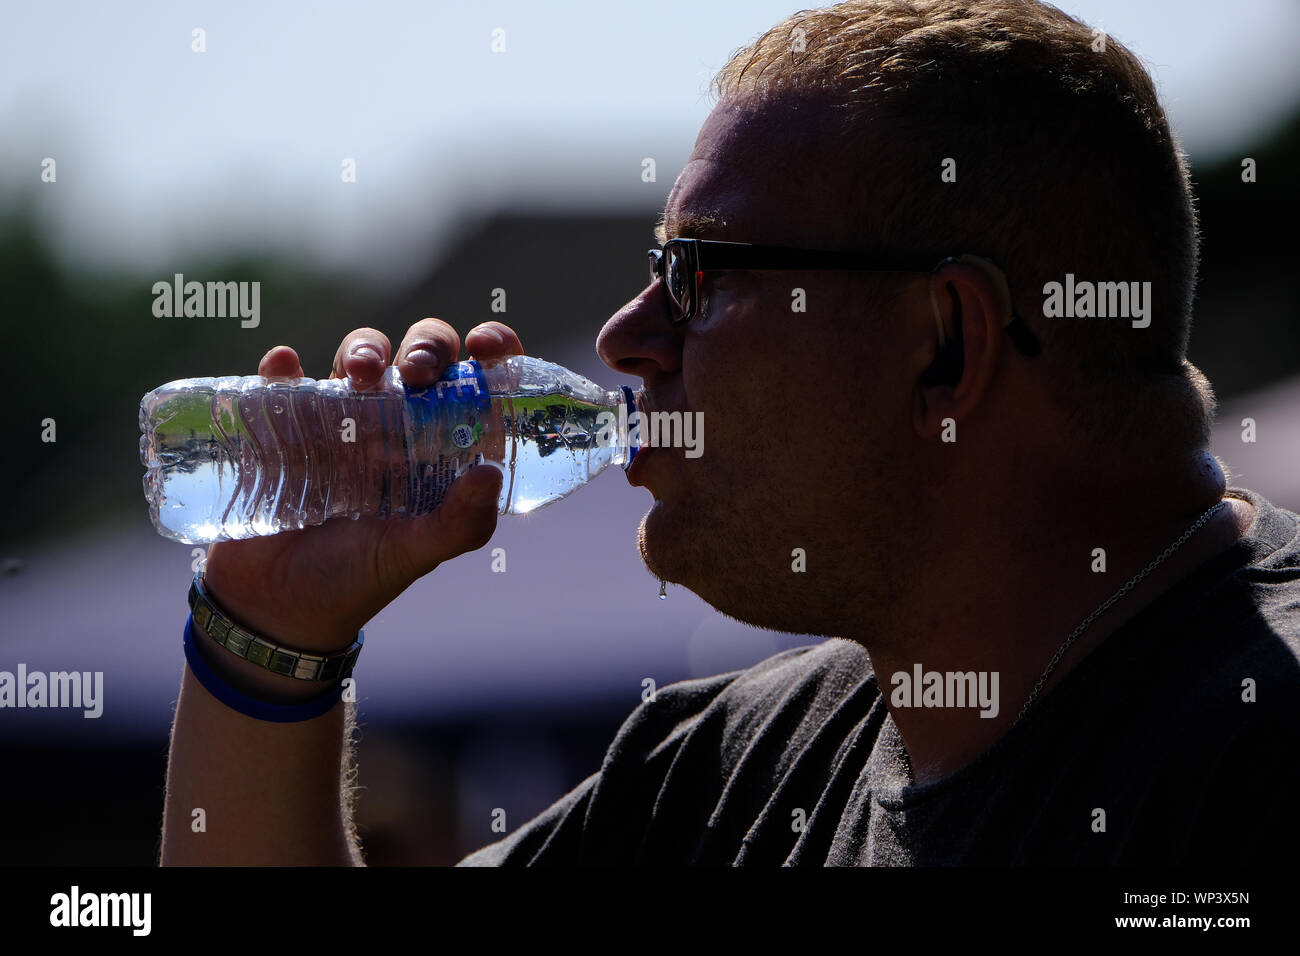 Motor bike enthusiast with drink n hot day at biker event. Stock Photo